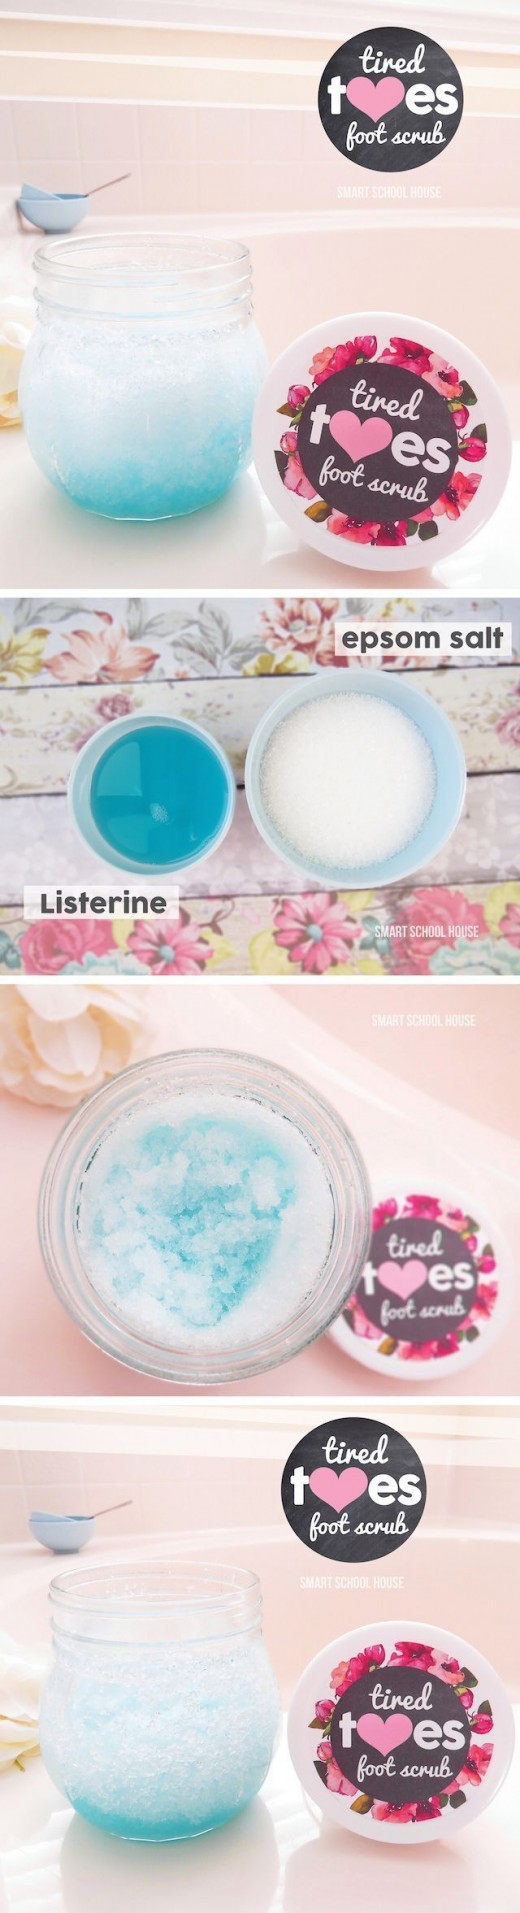 How to make an exfoliating foot scrub using Listerine! Exfoliates, removes foot odor